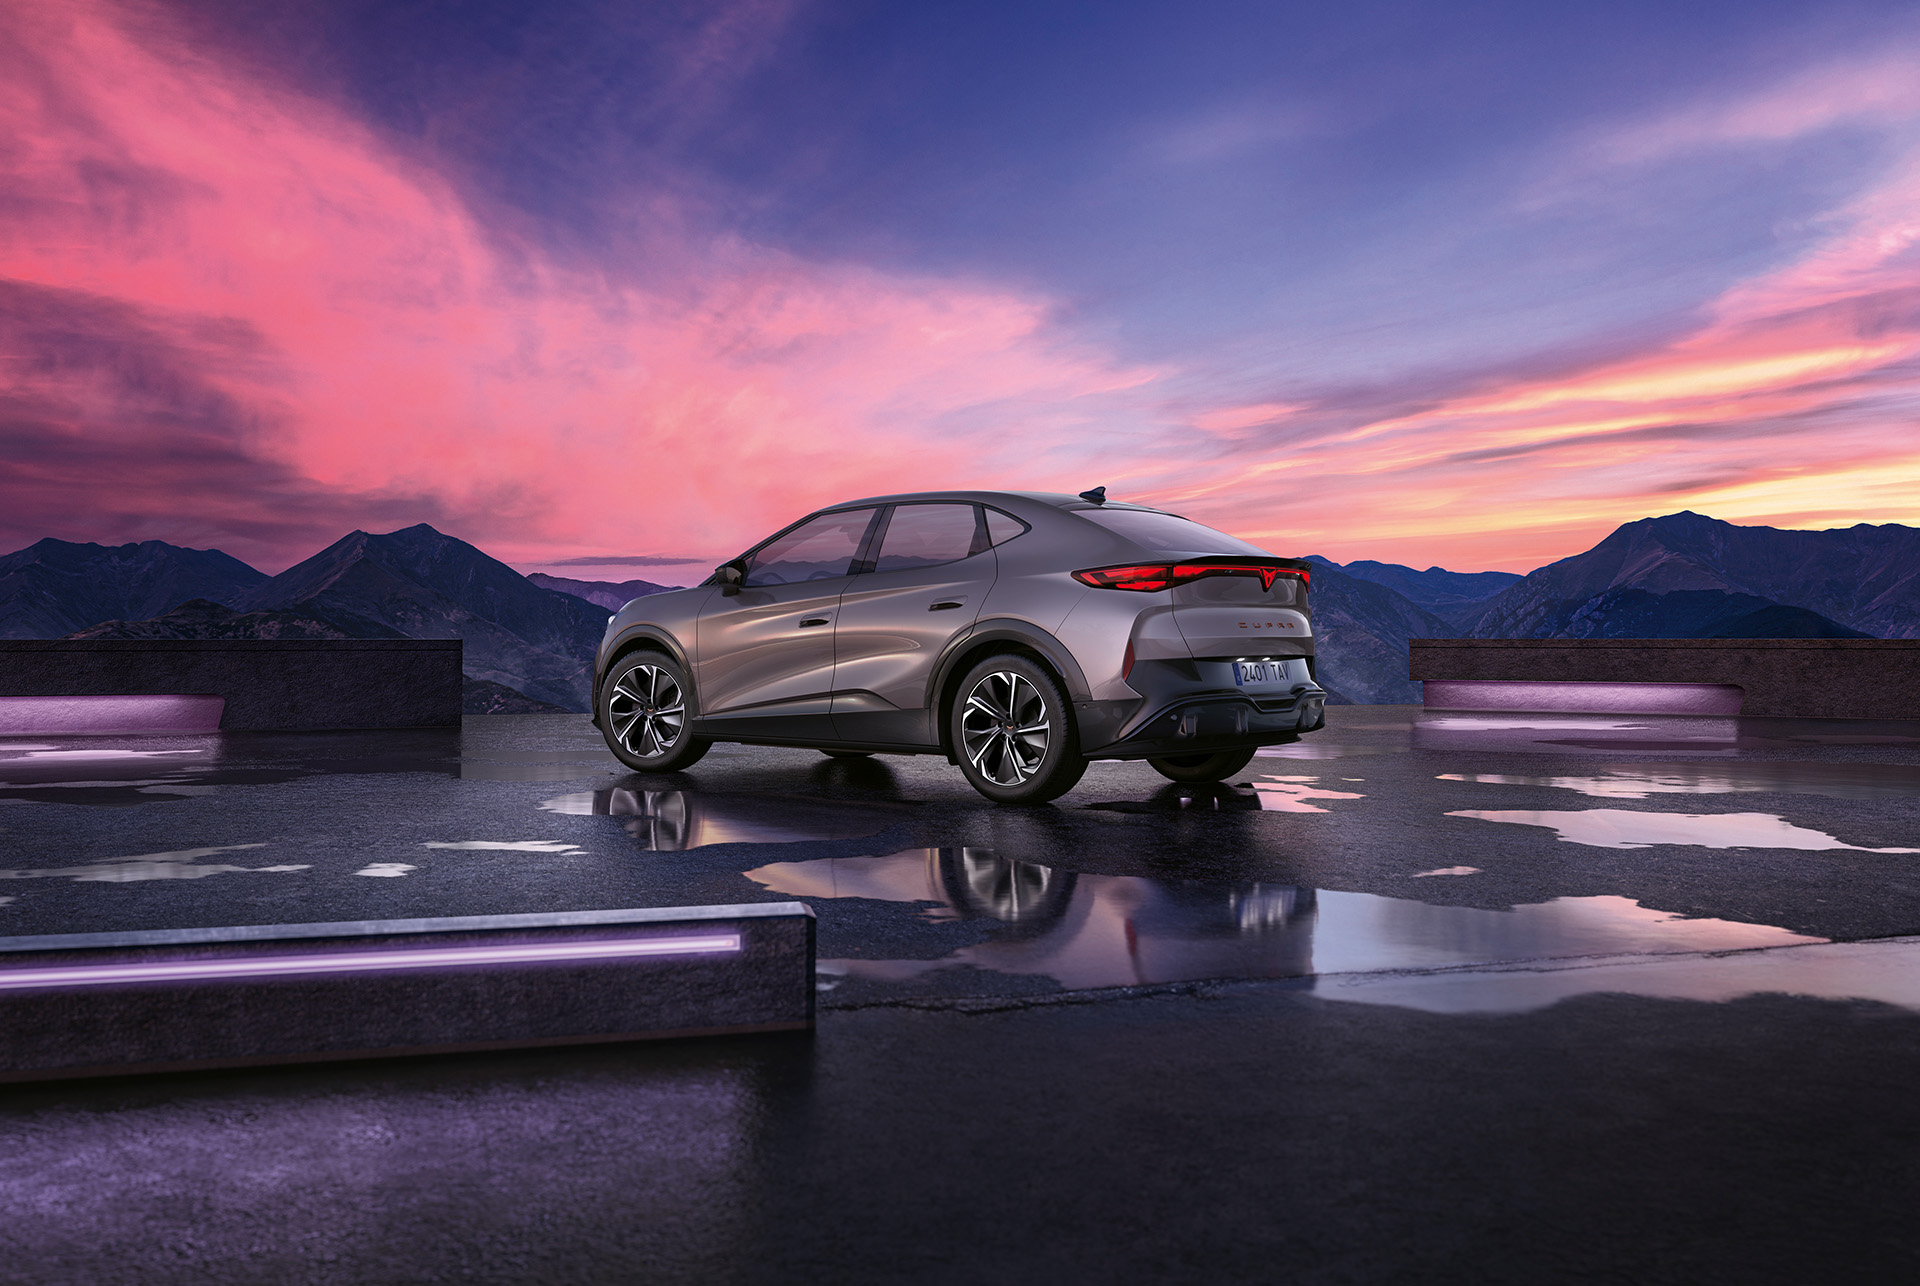 cupra tavascan SUV model showcased against a picturesque sunset